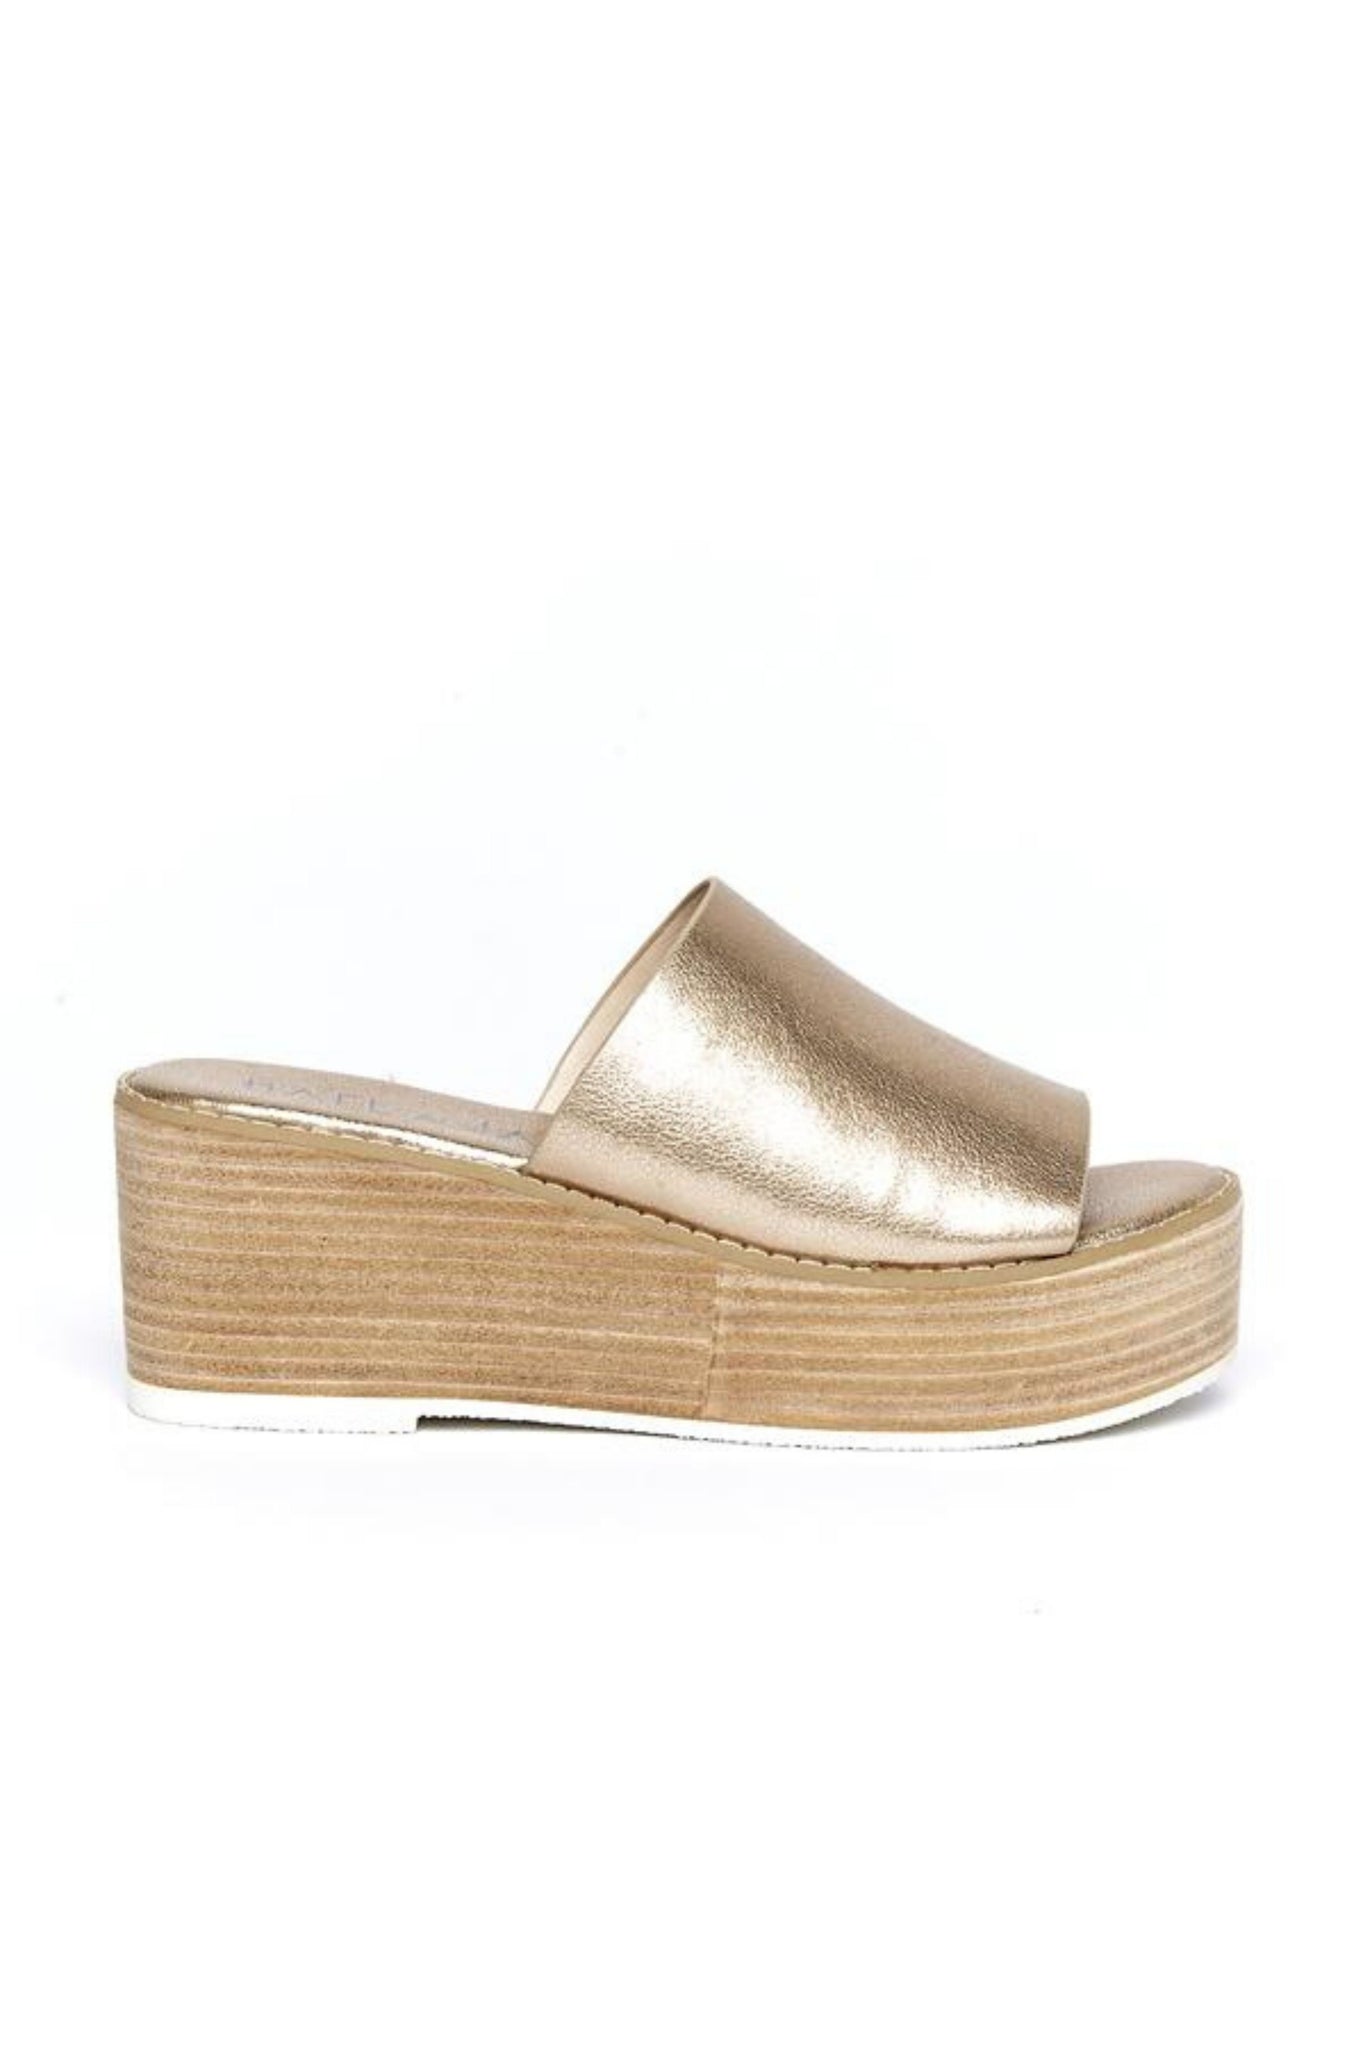 Buy Hael and Jax Hutton Flatform in Metallic Pearl online now at Smoke and Mirrors Boutique. Shop Hael and Jax Shoes with ZipPay and AfterPay. Hael and Jax Stockists Online, Brisbane, and Toowoomba. 